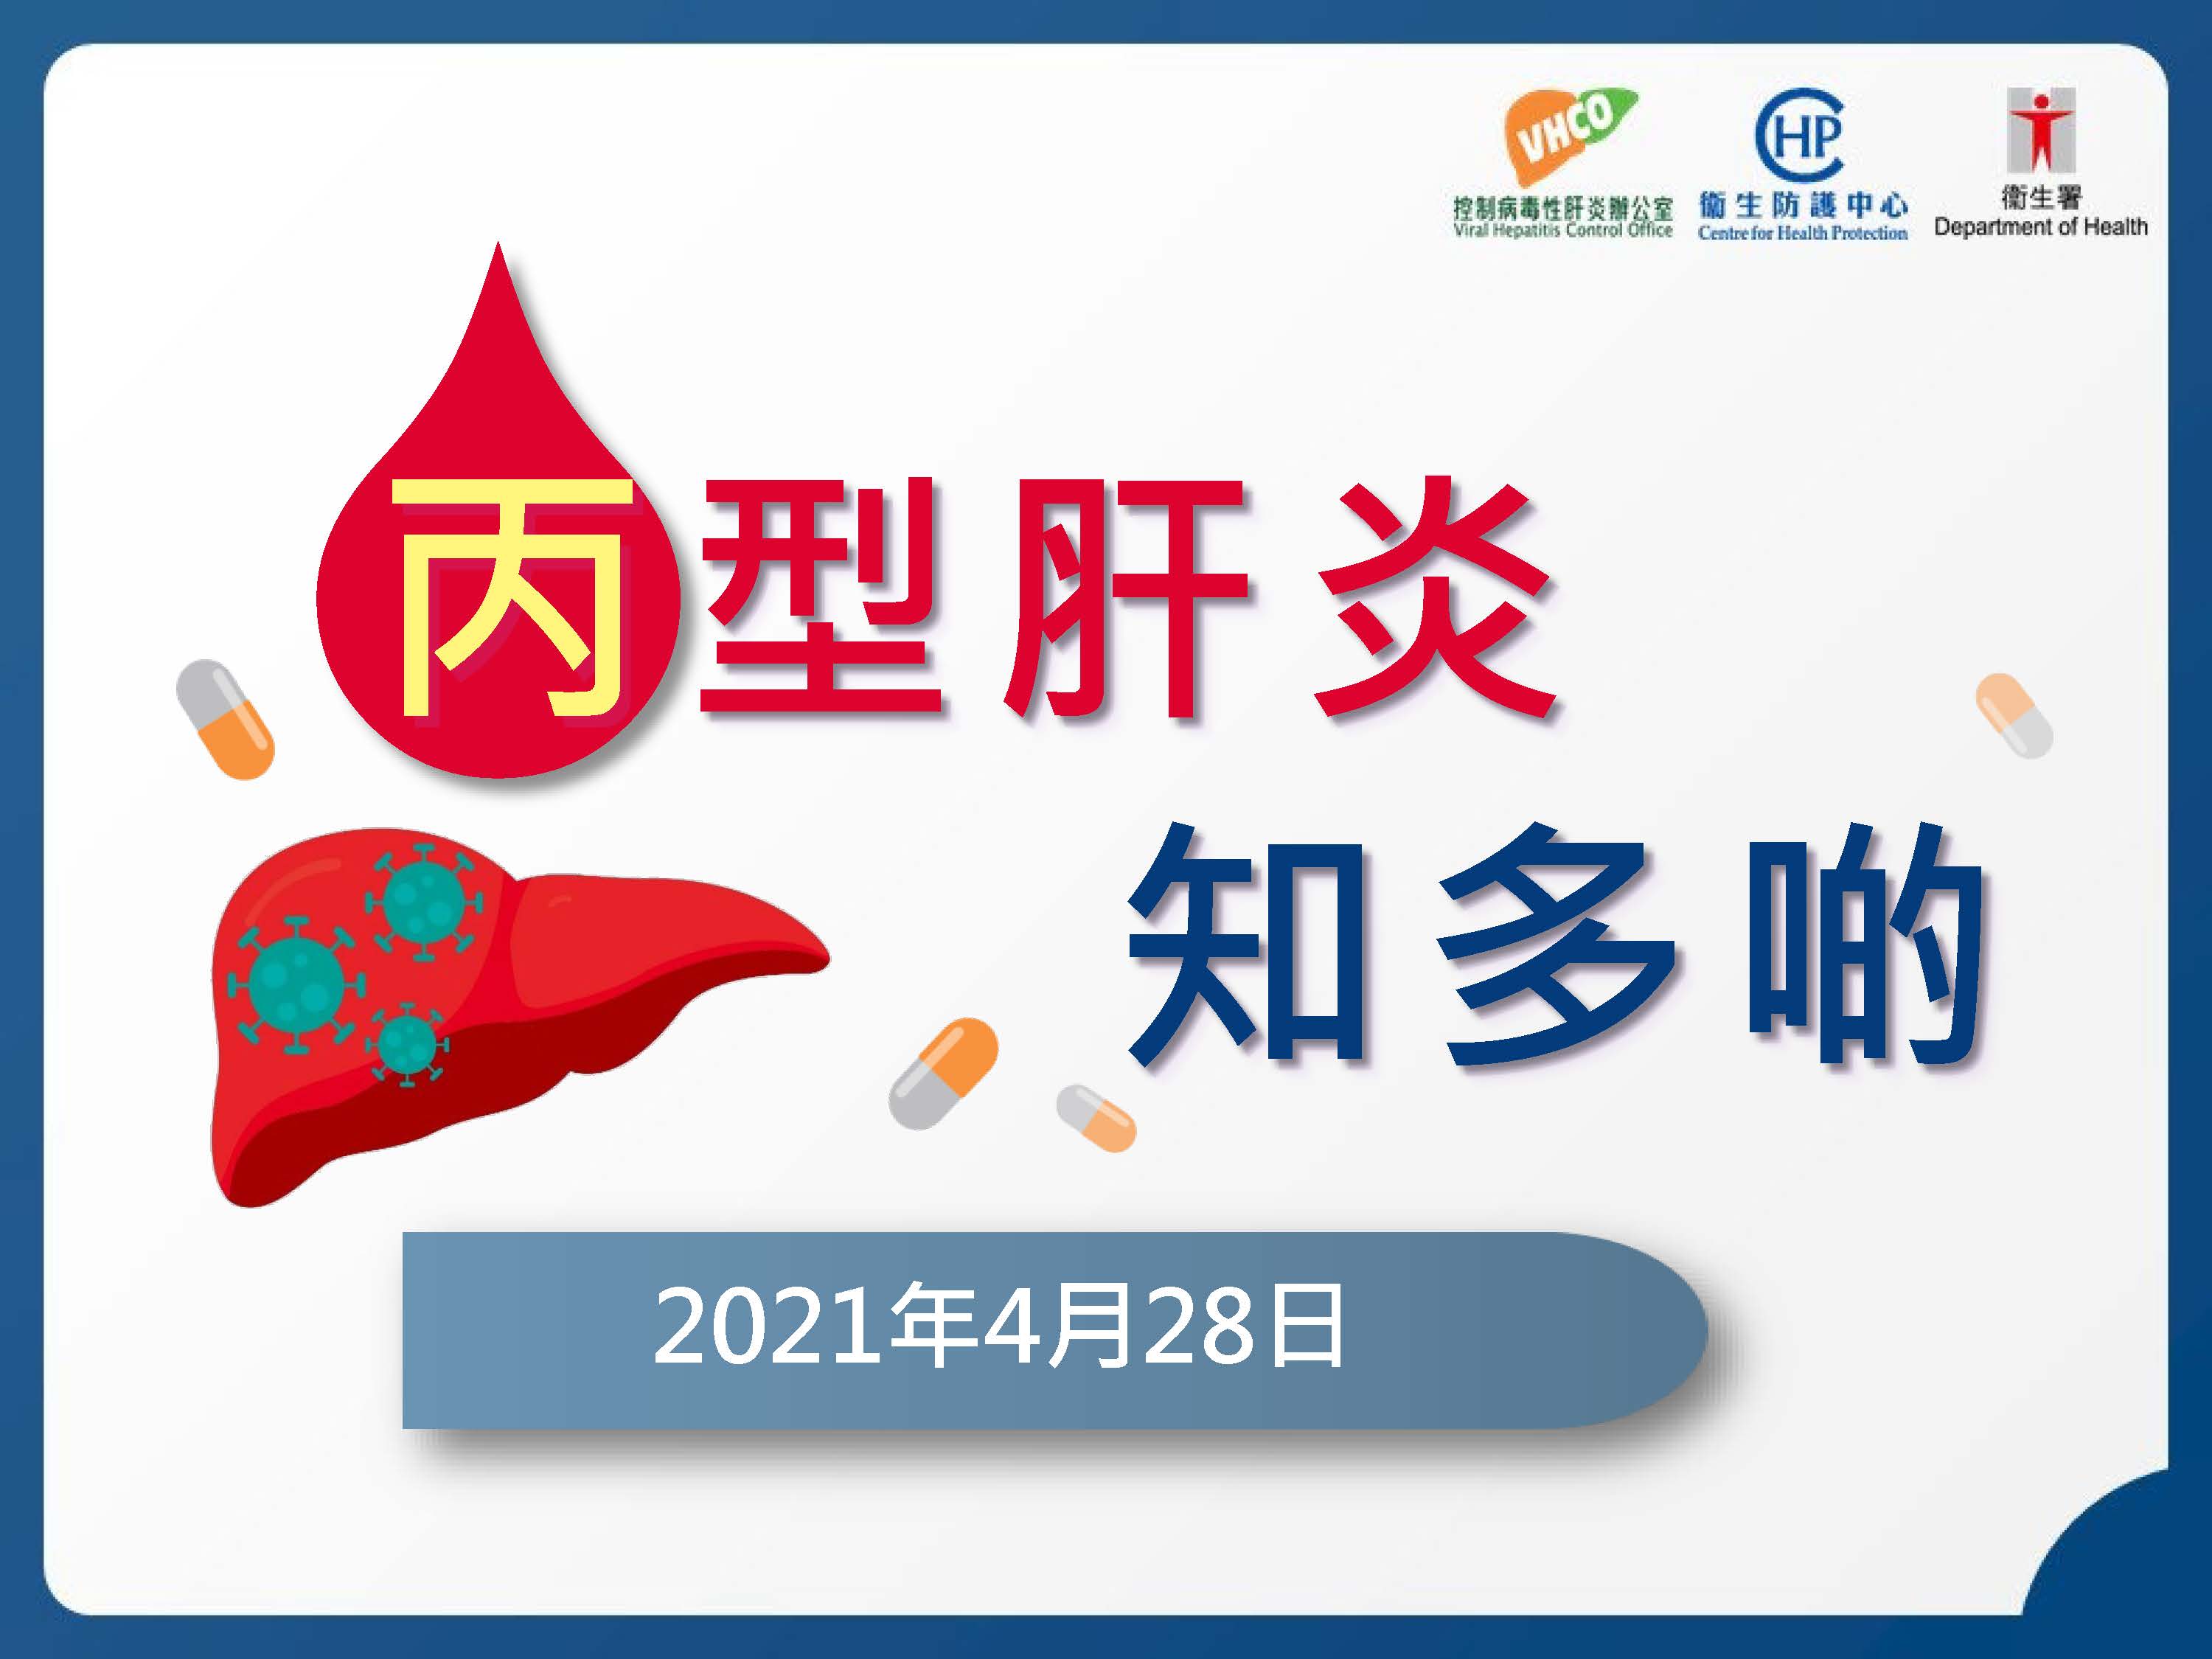 Presentation slides – Hepatitis C virus infection (only Chinese version available)